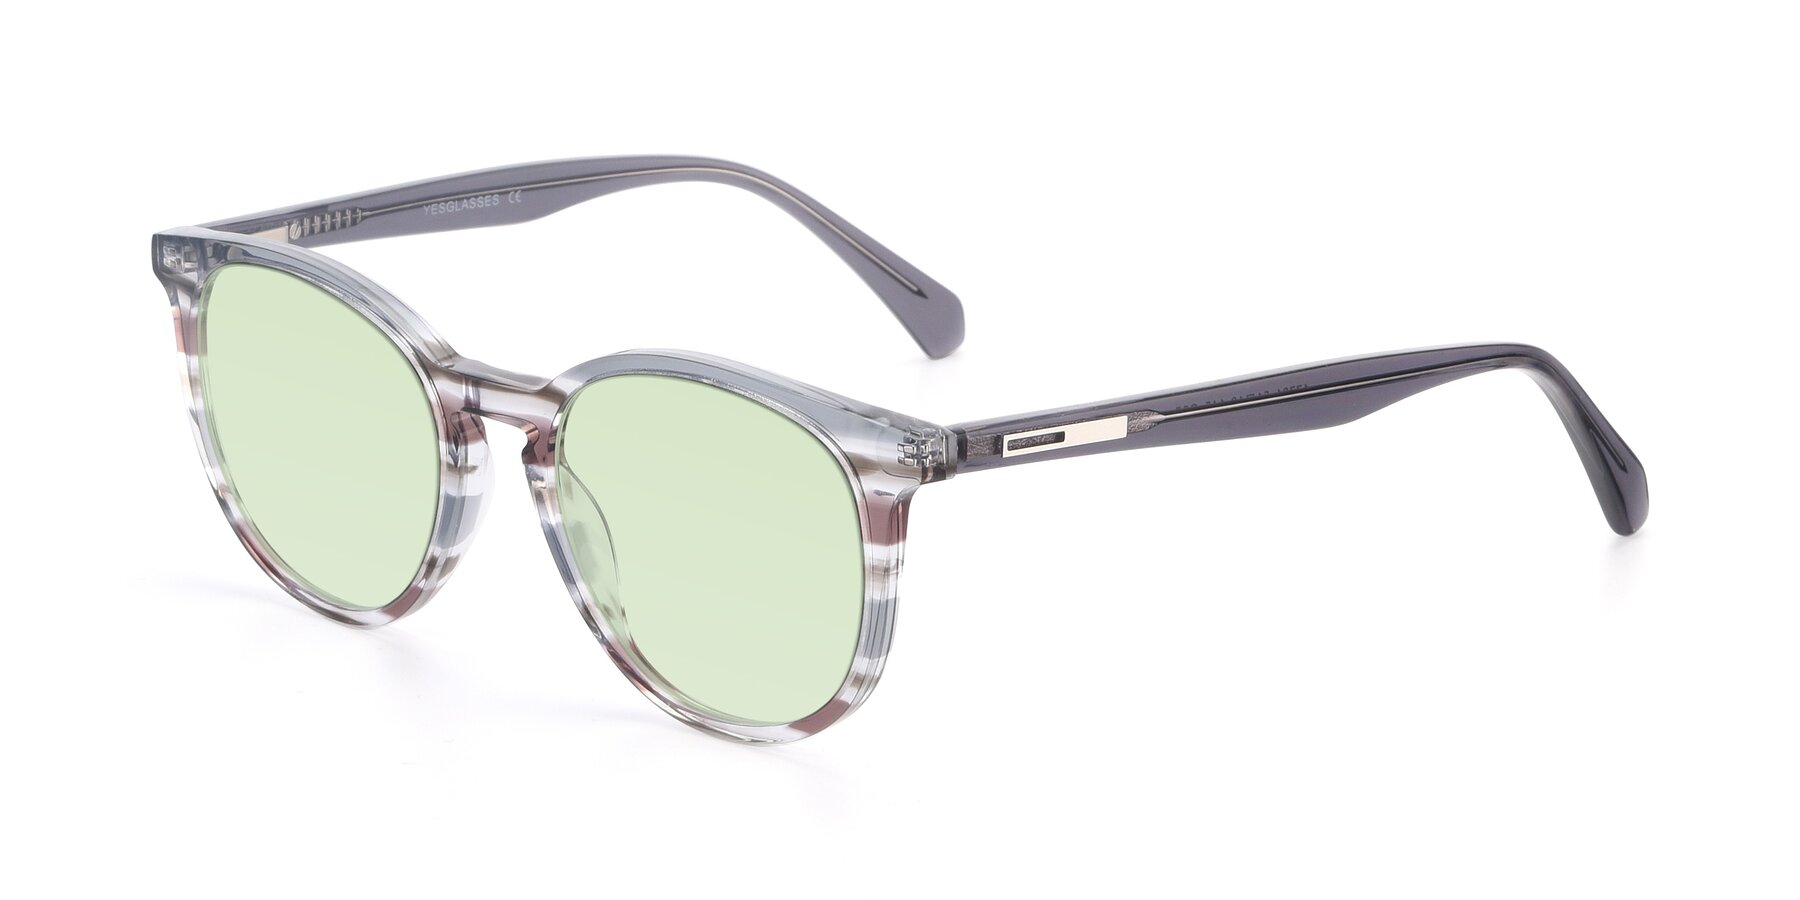 Angle of 17721 in Stripe Grey with Light Green Tinted Lenses